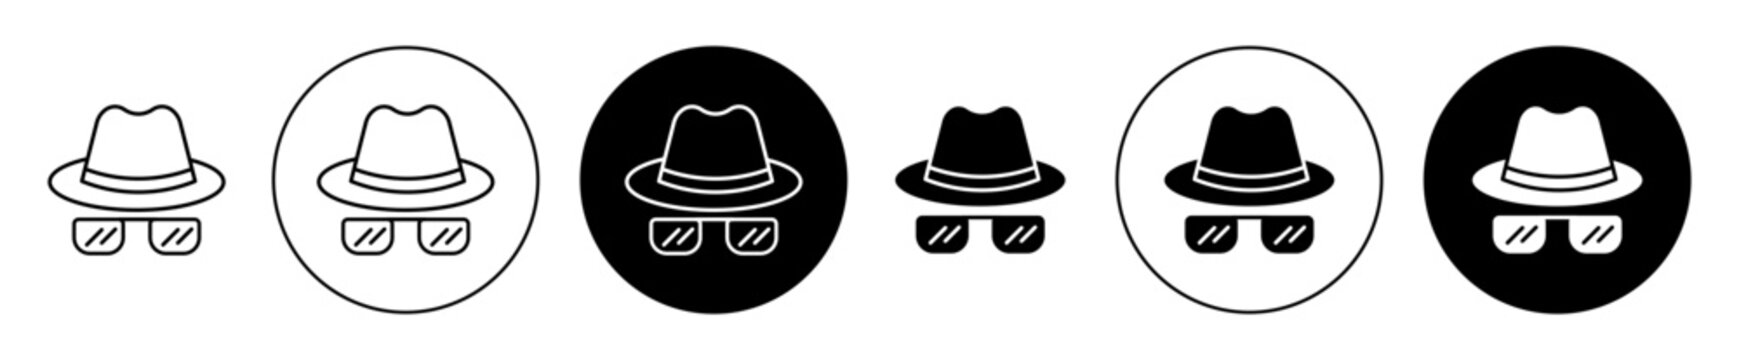 Spy icon set in black filled and outlined style. suitable for UI designs